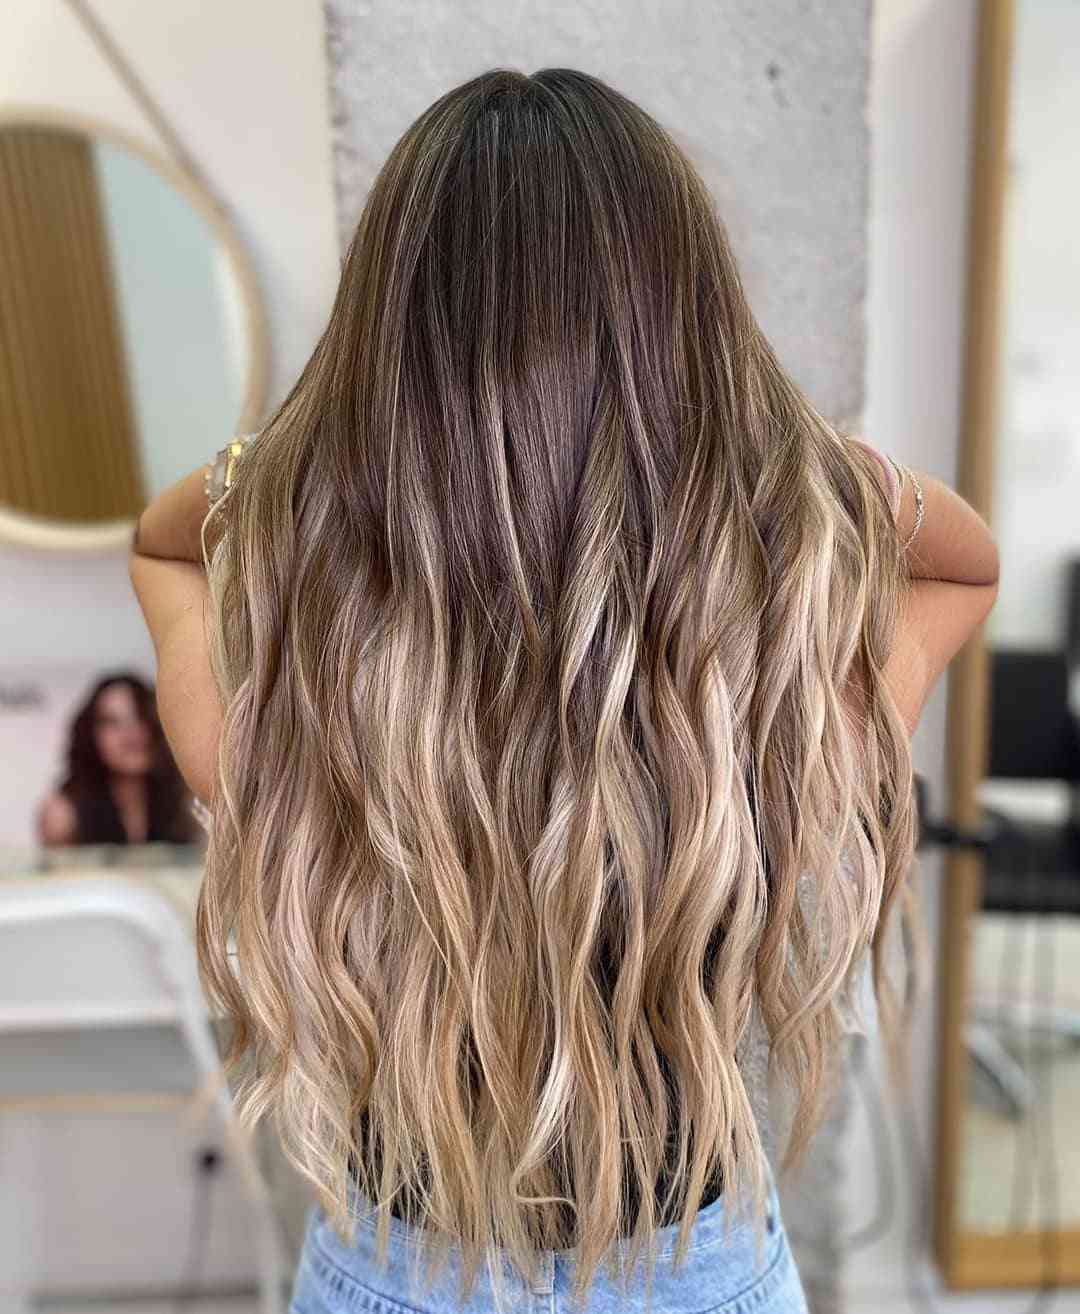 100+ Trendy Hairstyle Ideas For Women To Try In 2021 images 59